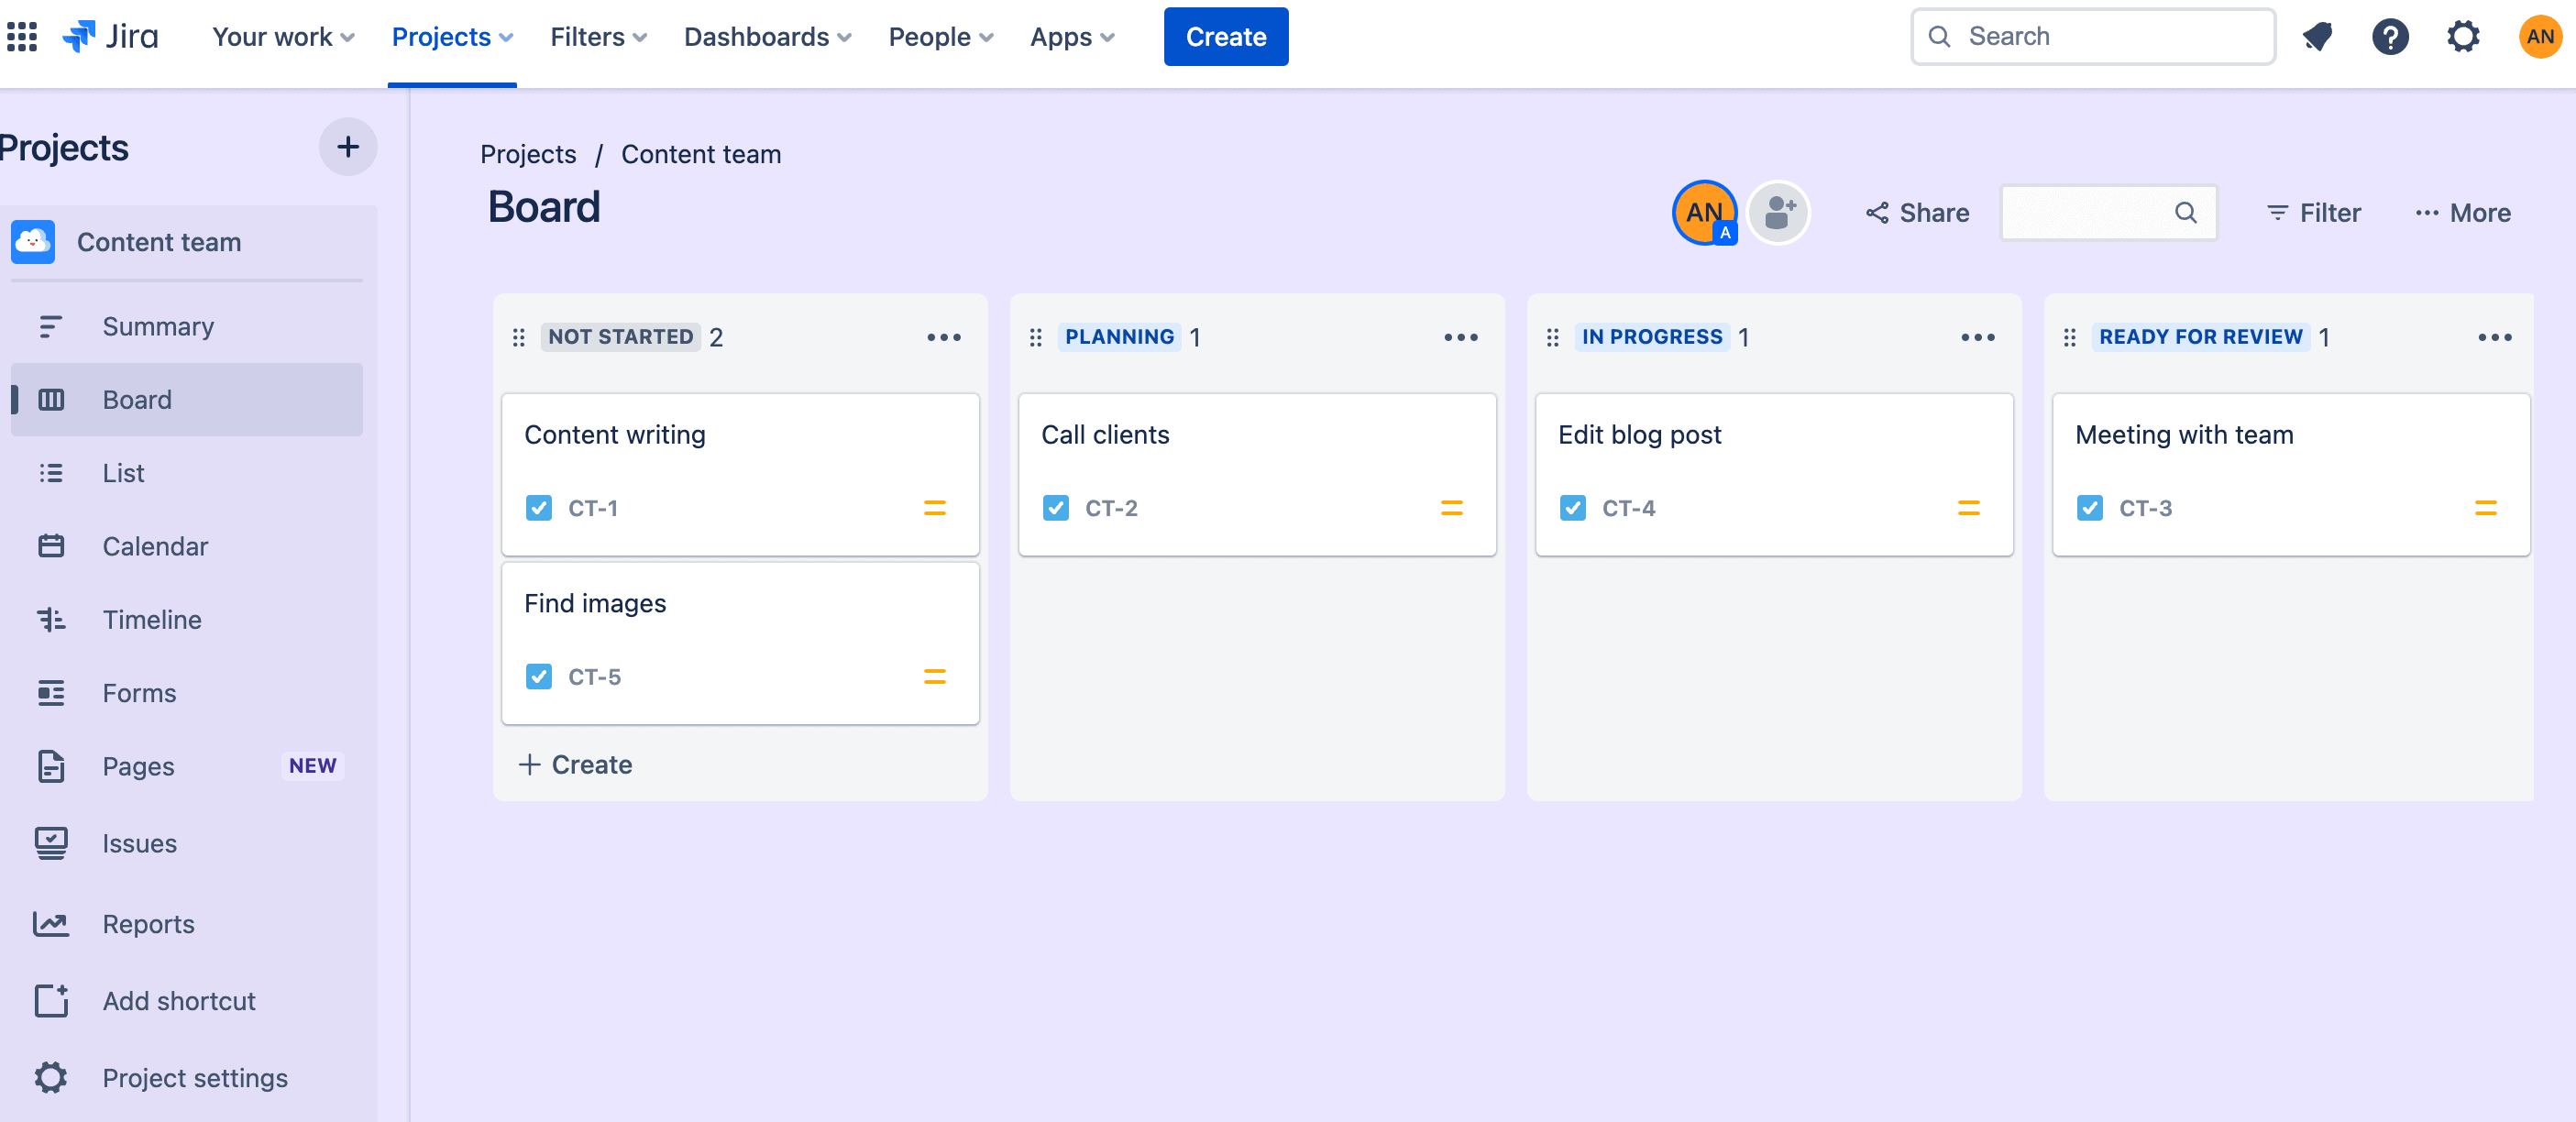 Jira is an Agile tool for project management.